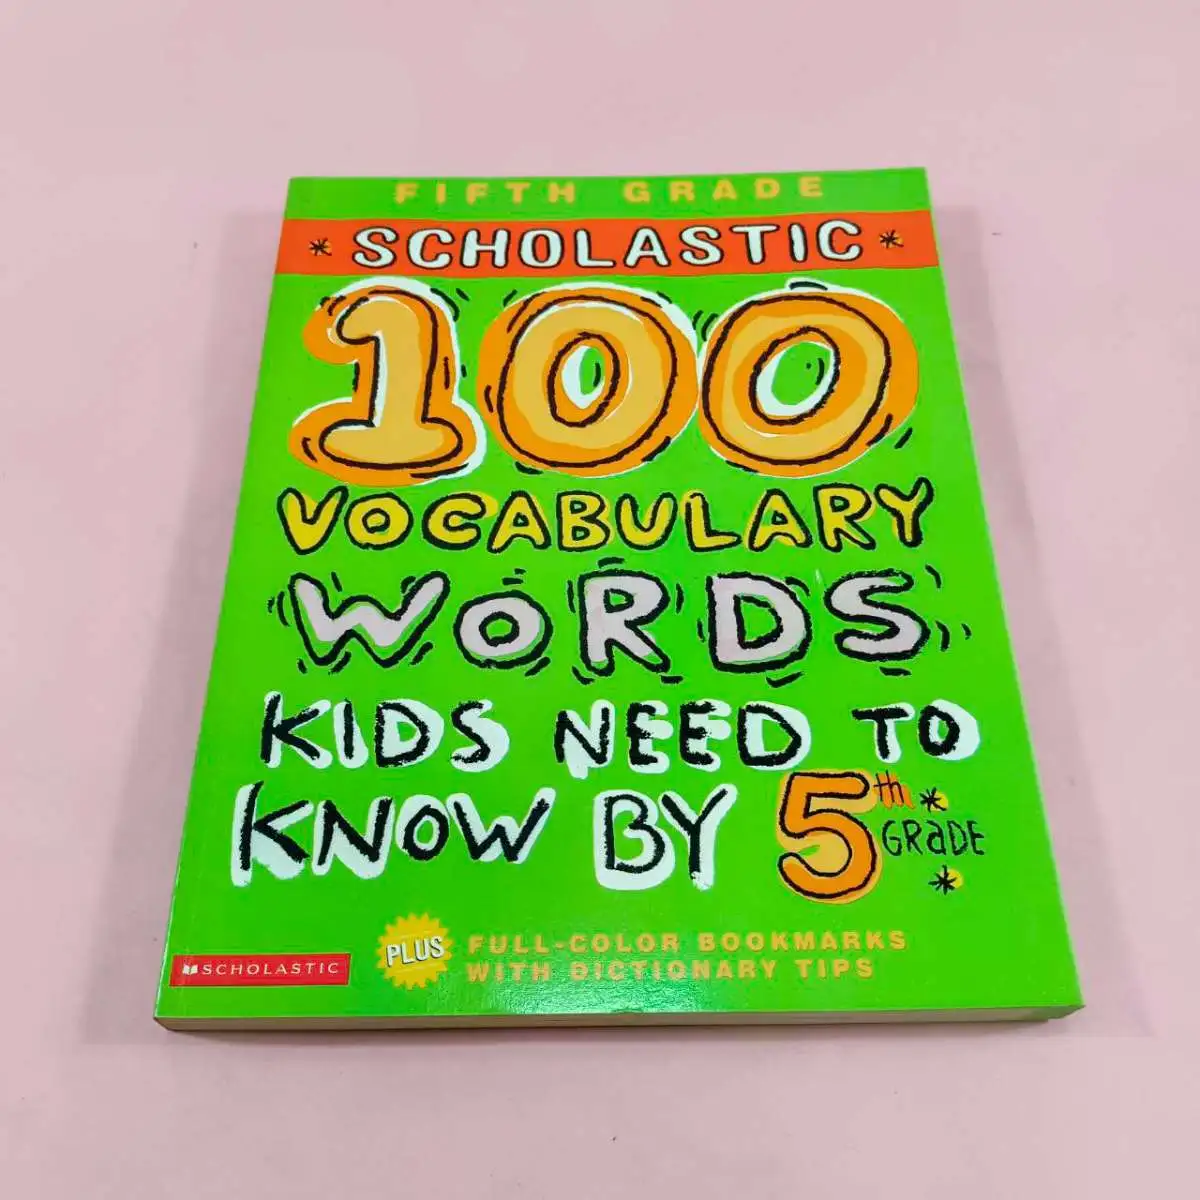 vocabulary words kids need to know by 5th geade เขียว